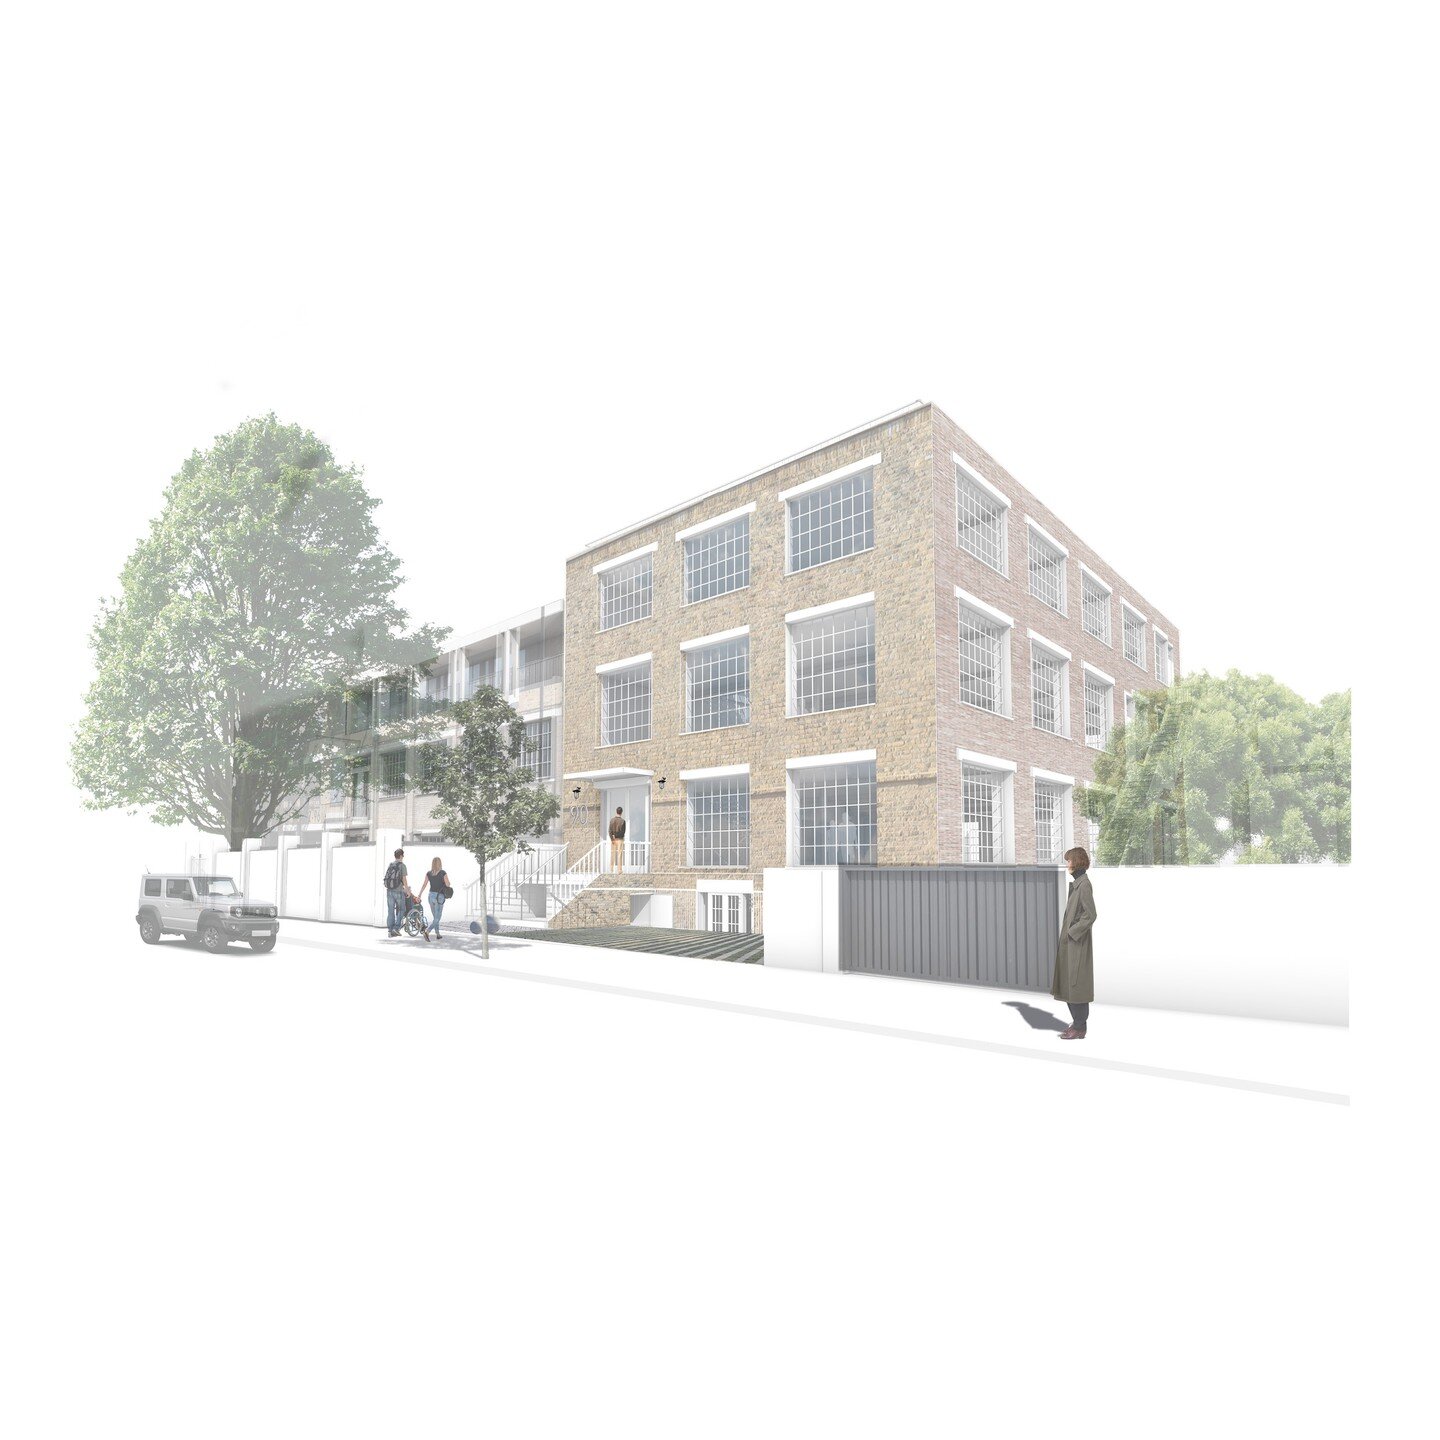 Works are well underway for our refurbishment of No.90 De Beauvoir in Hackney. The former furniture factory will be restored to provide a refreshed creative working space for its tenants, including a re-landscaped front courtyard bringing light to th